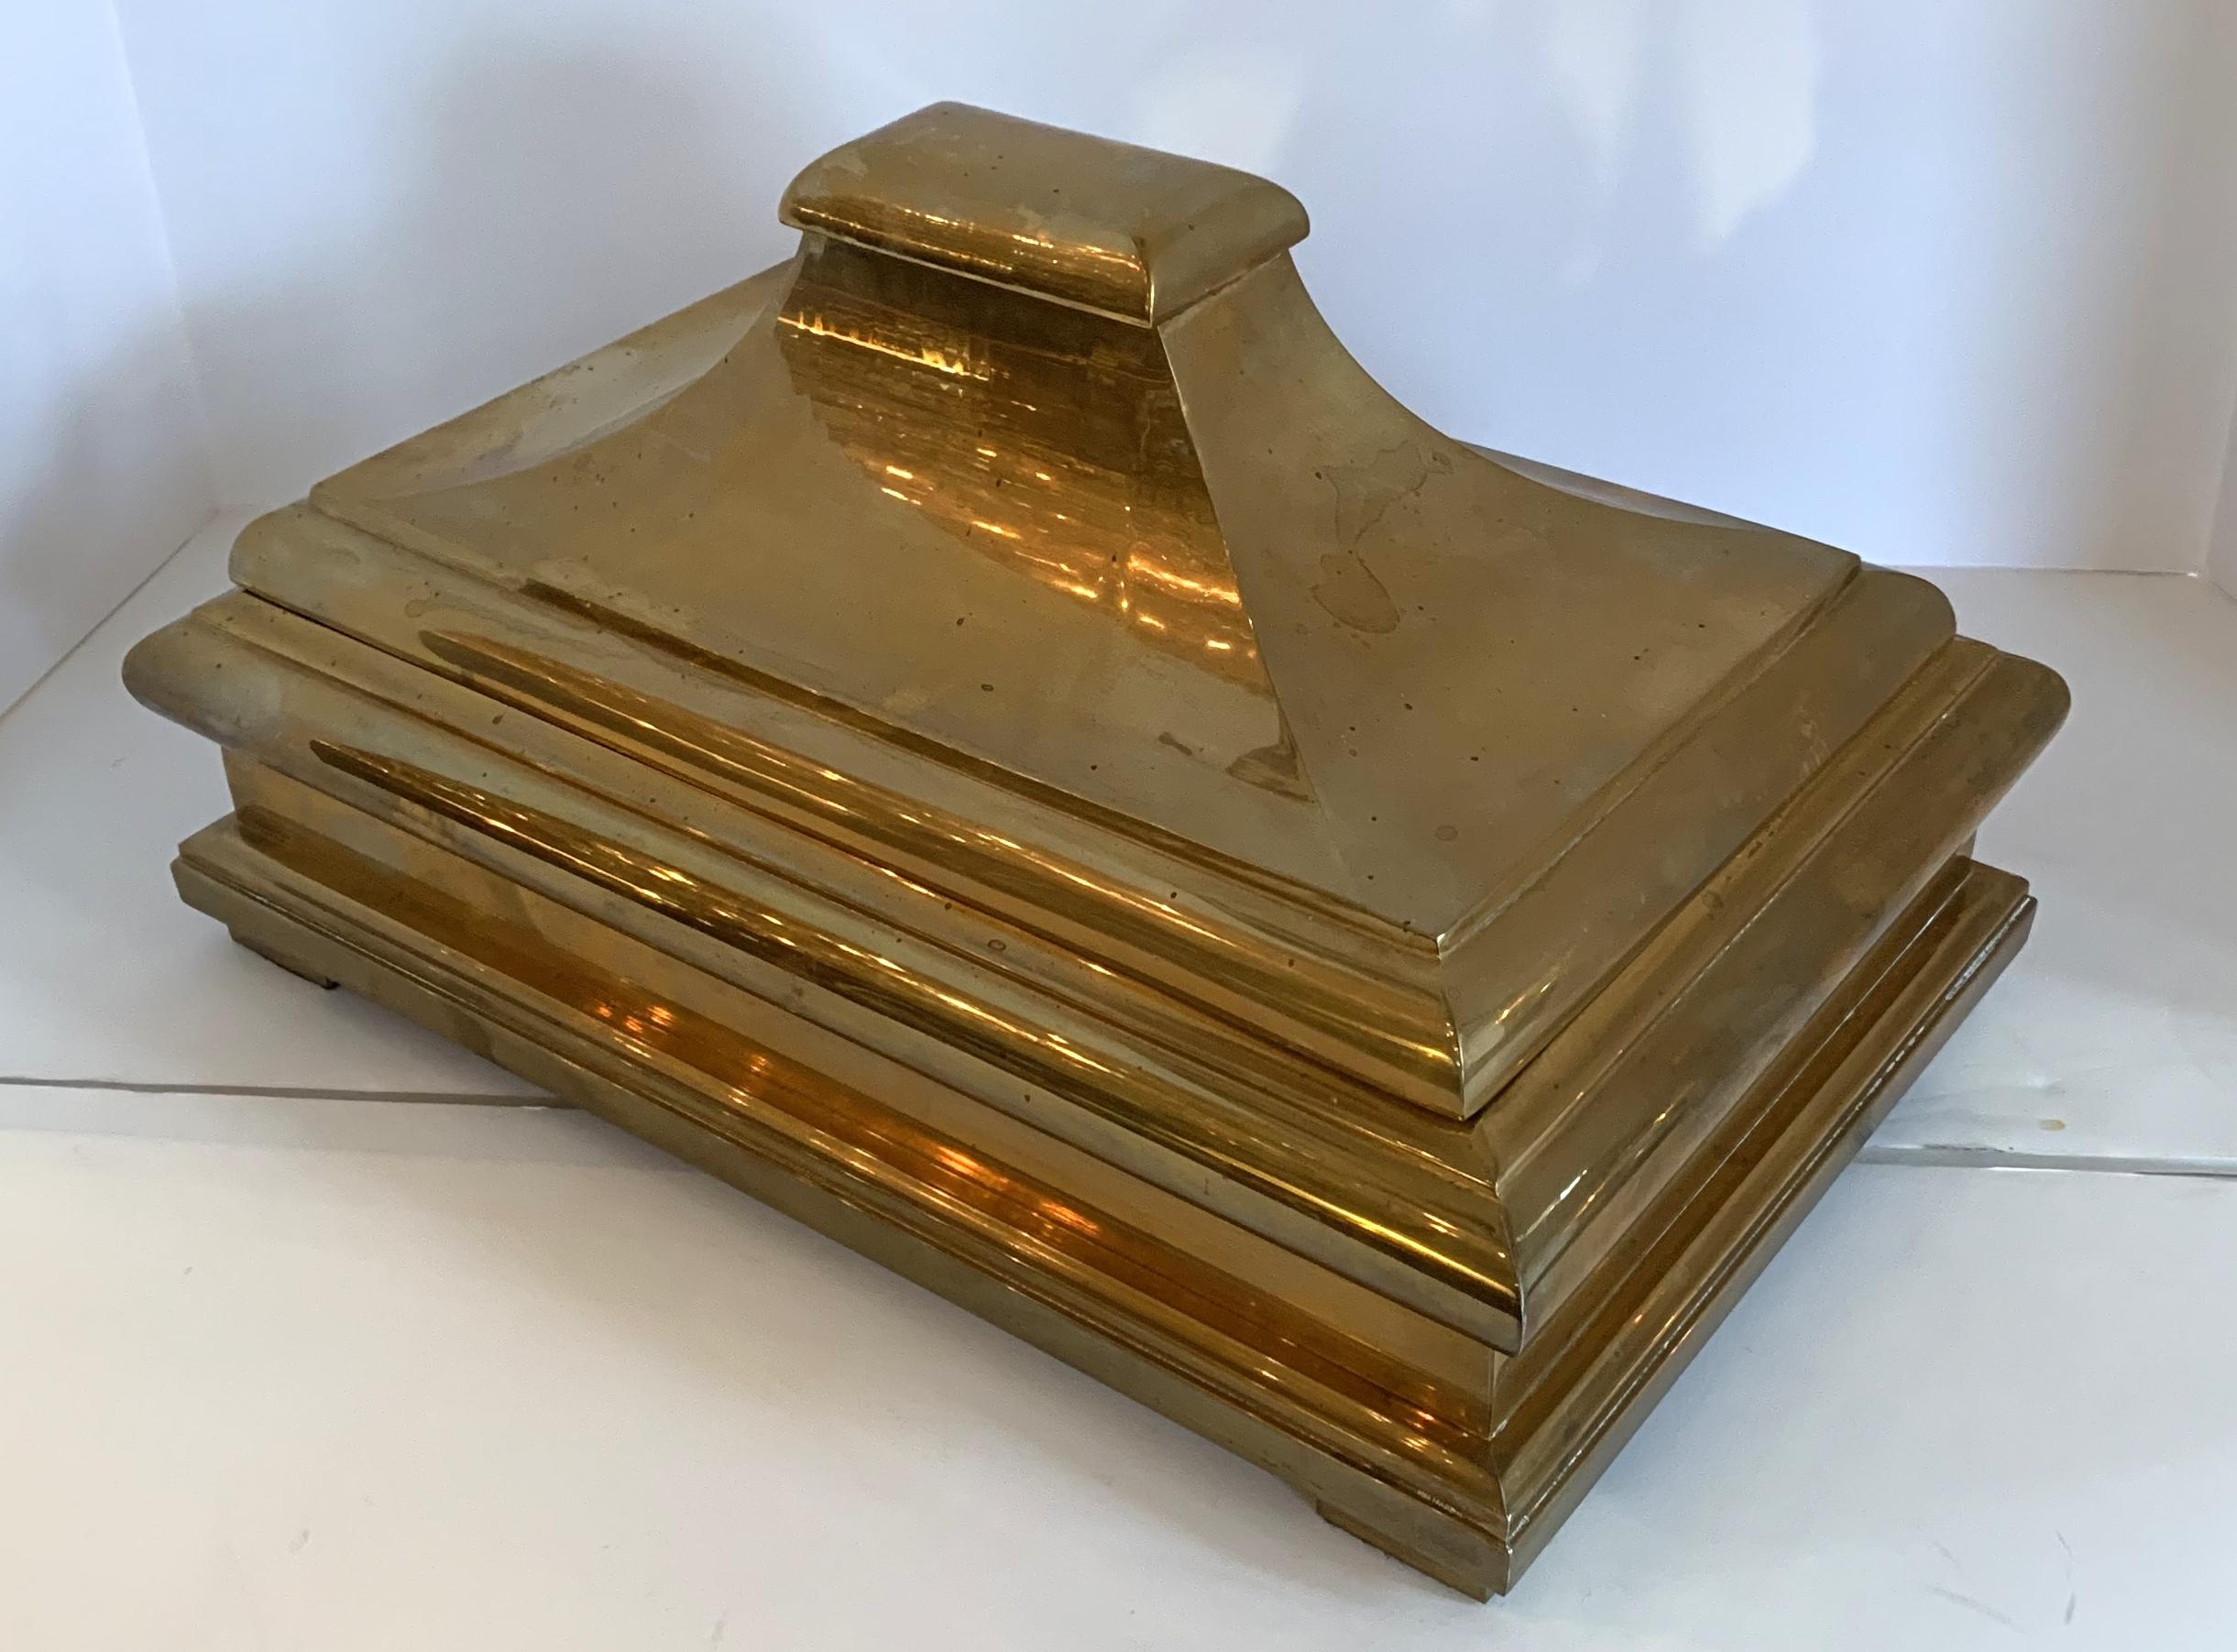 A wonderful Mid-Century Modern brass / bronze pagoda form box with lid, circa 1978 with a black felt interior along with pads on the feet. Has not been polished, but will certainly sparkle when done.